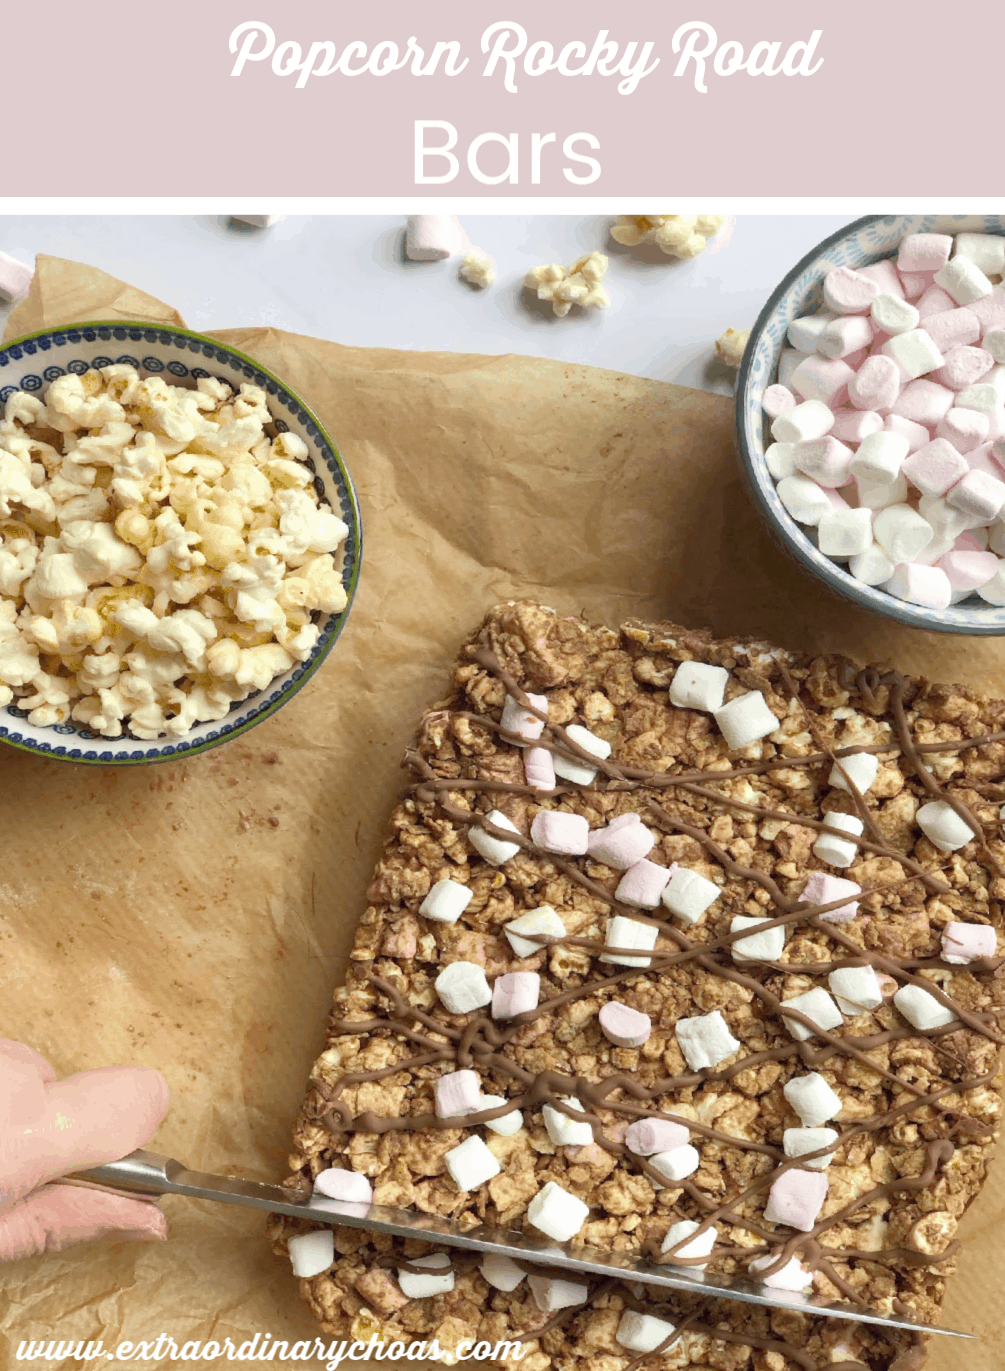 Popcorn Rocky Road Bar a low fat easy to make snack perfect for party food